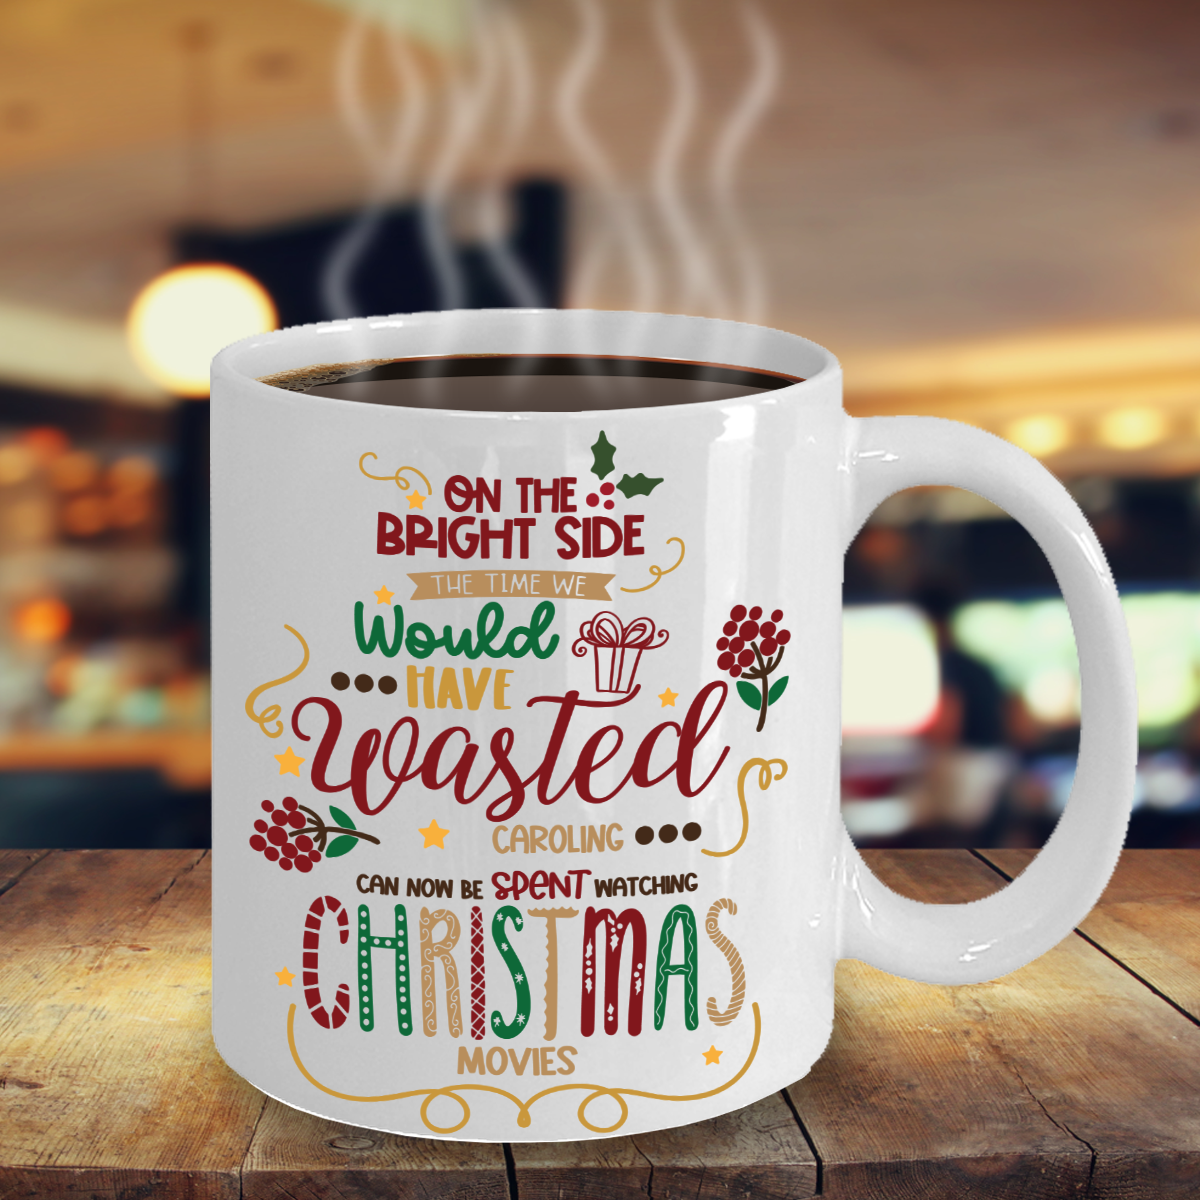 Motivational Life Is Too Short To Wait Ceramic Travel Mug with Lid,  Christmas Gift, Xmas, Eco-Friendly Re-usable Mug,Coffee Cup,Takeaway